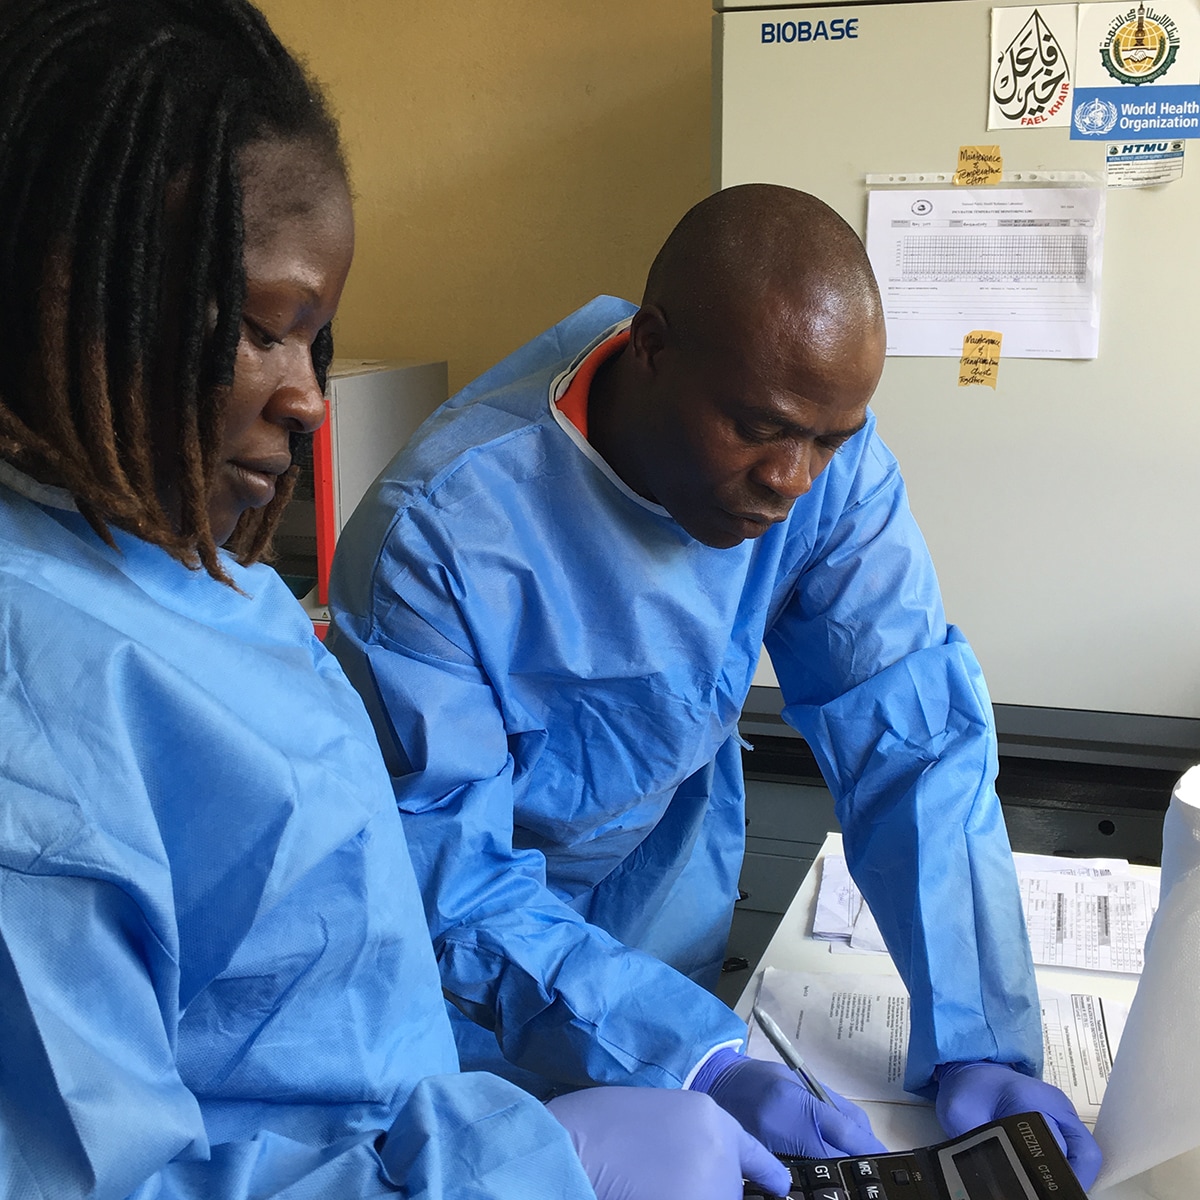 In 2019, National Public Health Institute of Liberia bioengineers make calculations to assess and repair bio safety cabinets